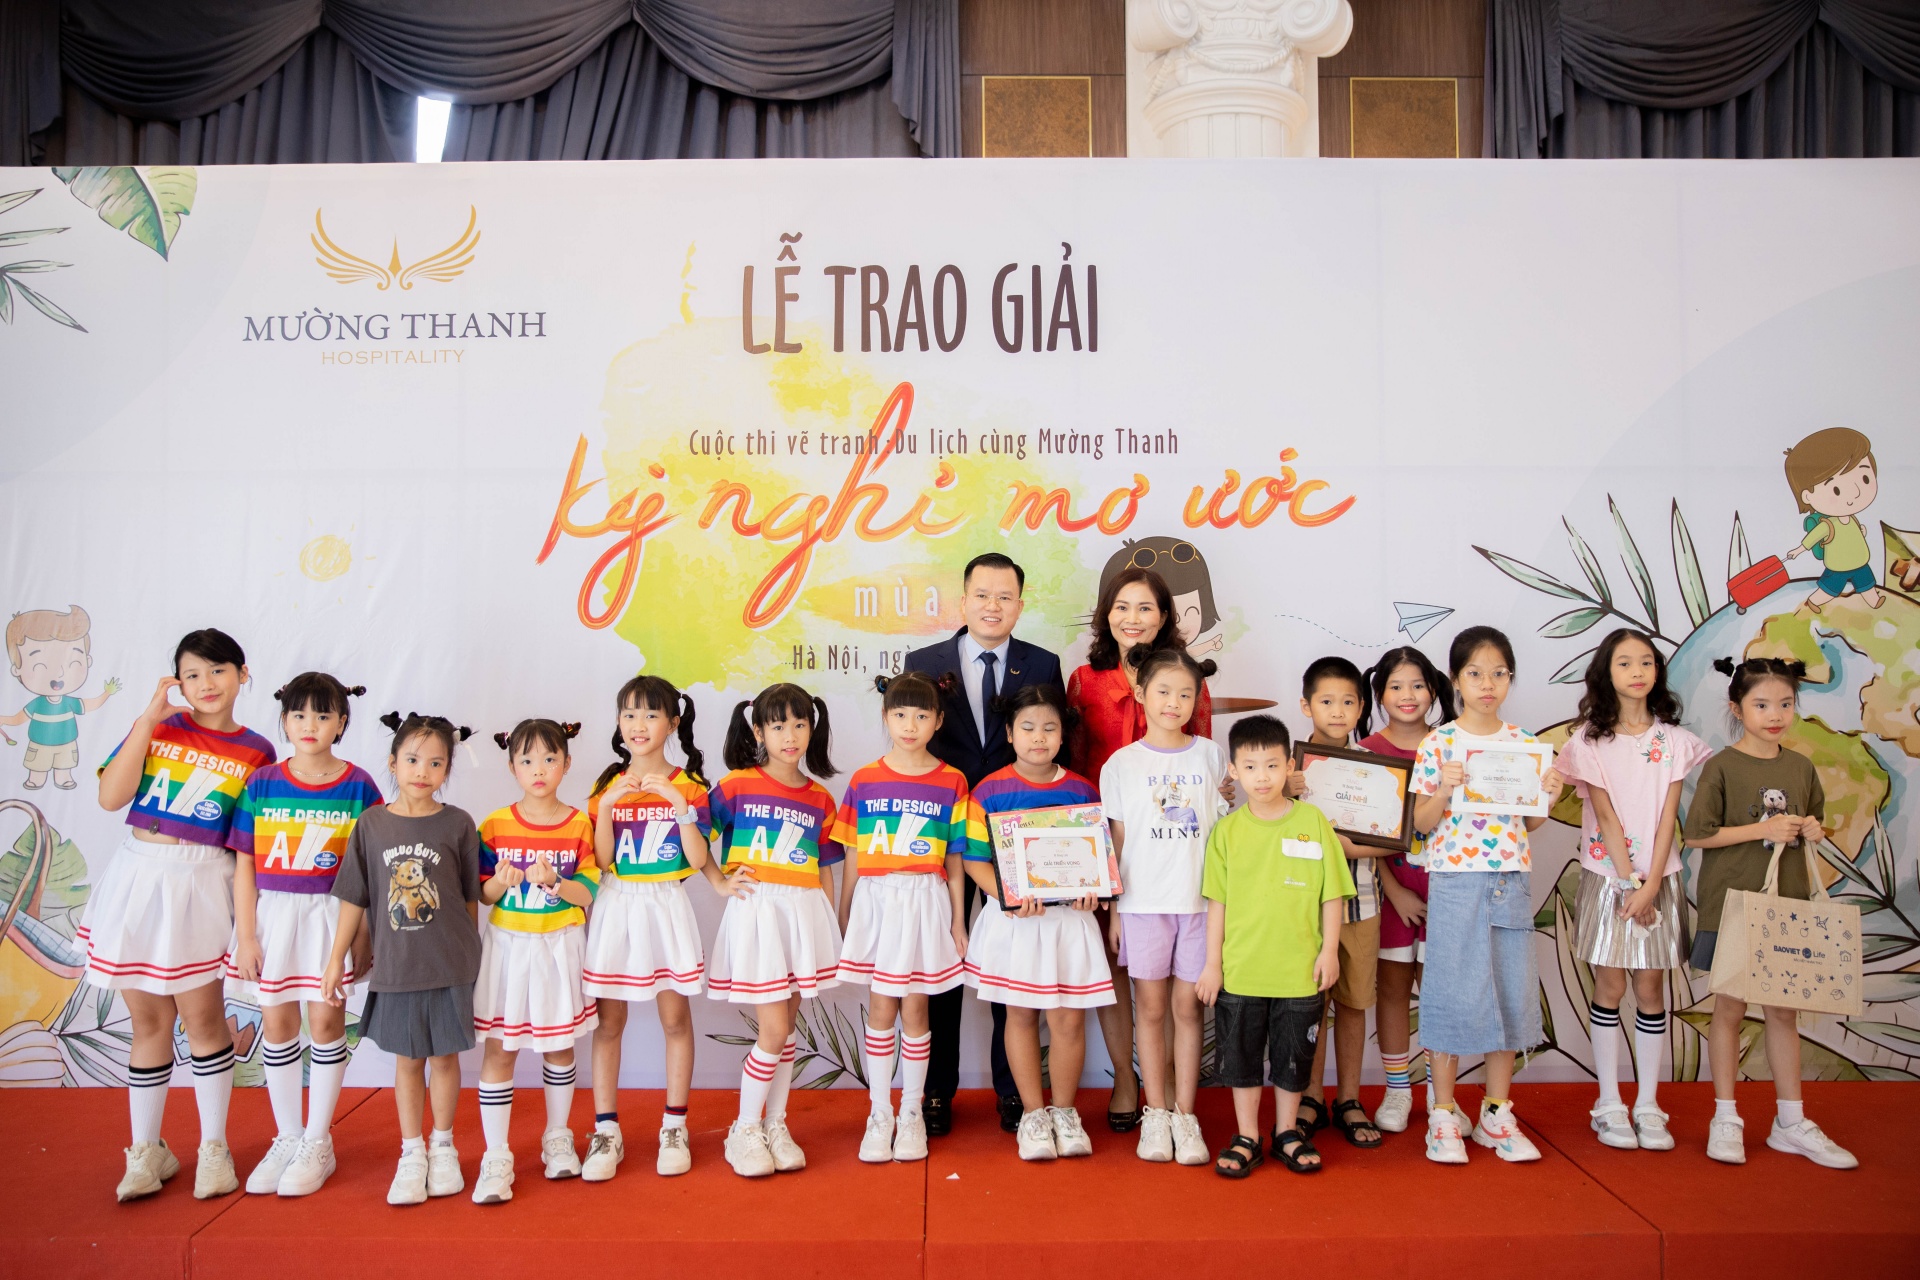 launch of third travel with muong thanh dream vacation drawing contest